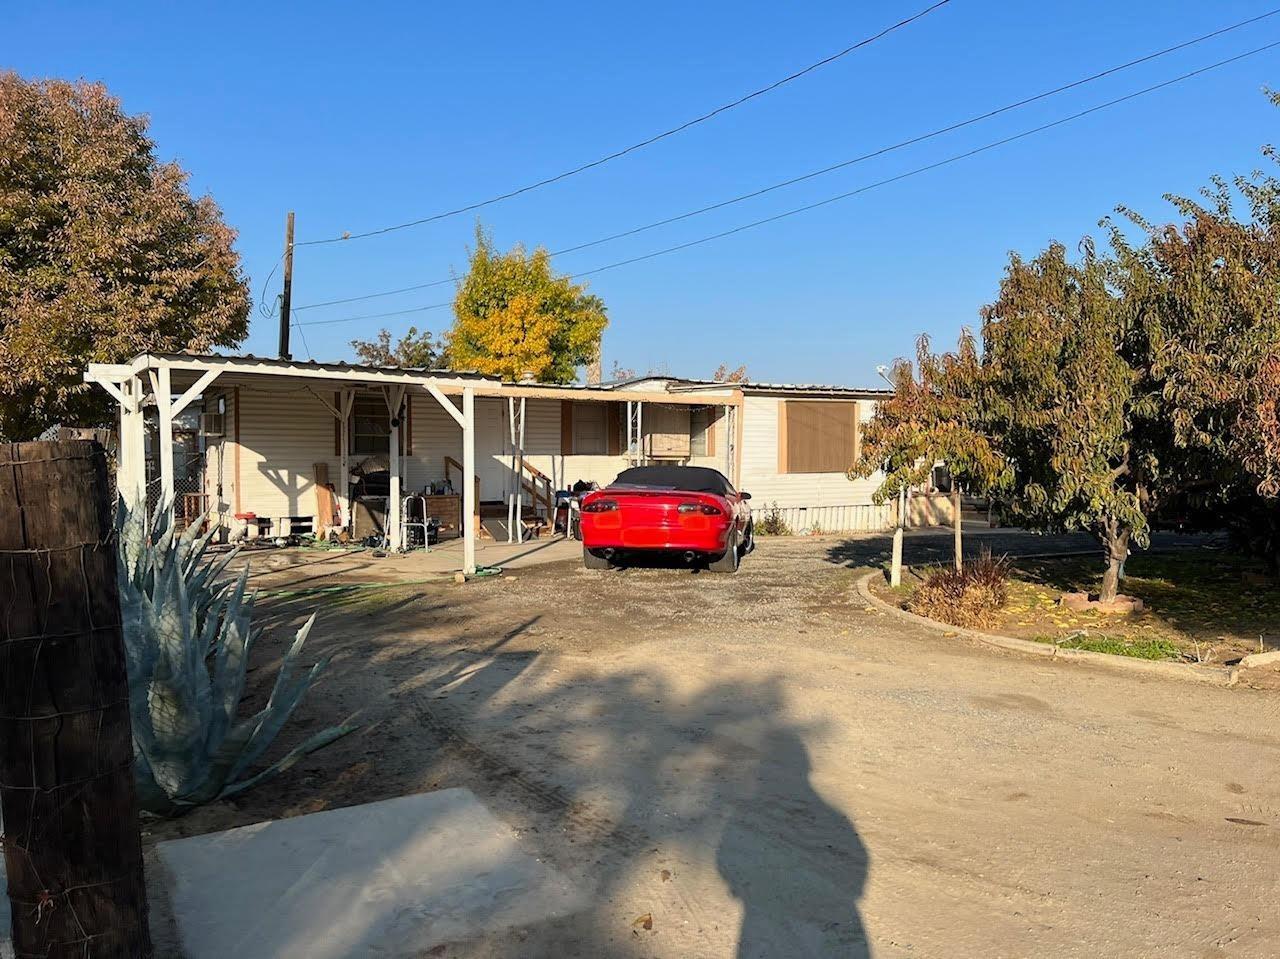 Photo of 1057 W Northgrand Ave in Porterville, CA